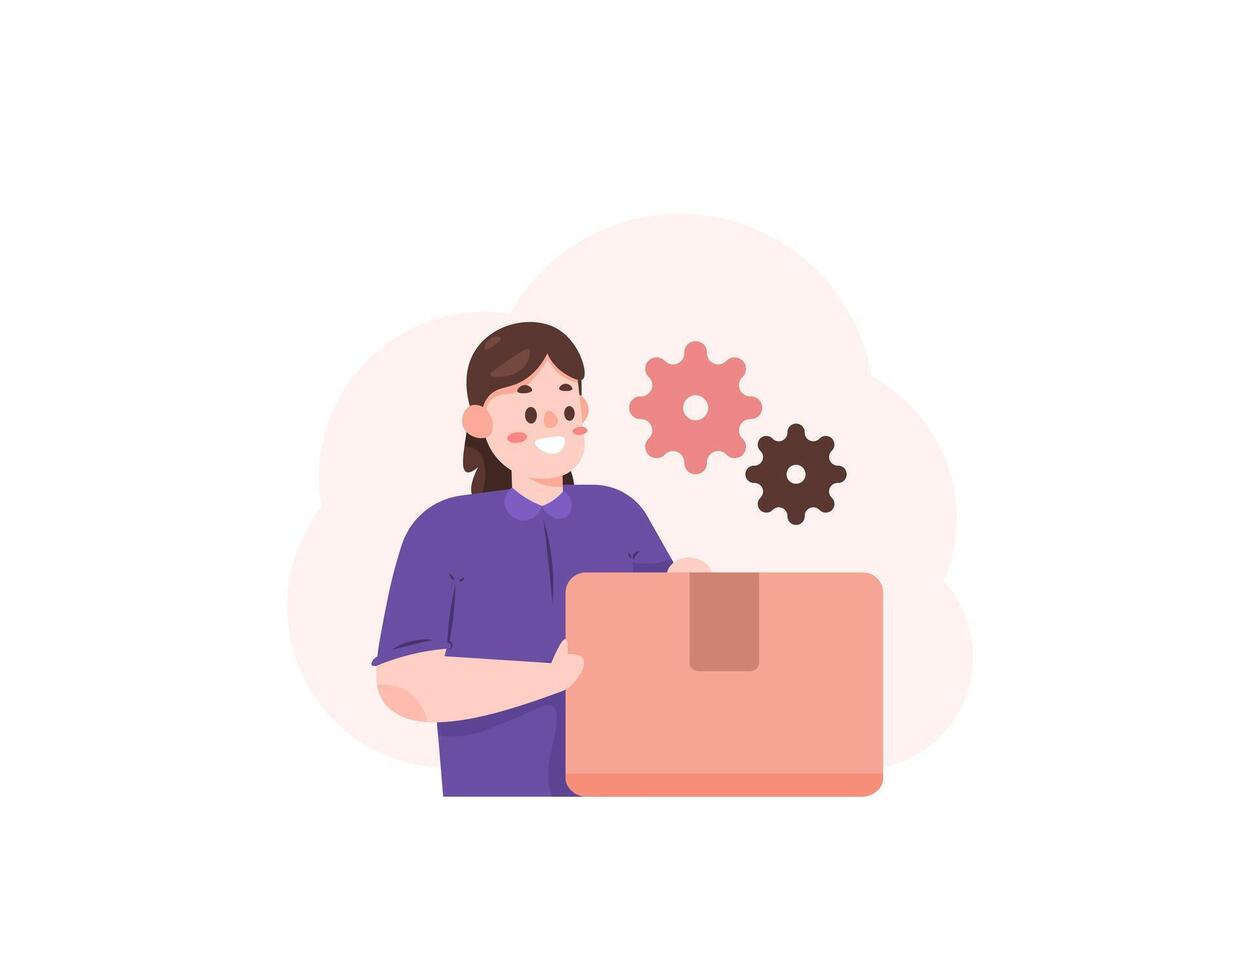 inventory management and inventory control. warehouse staff or workers. calculating the amount of inventory stock, checking data, collecting data on warehouse goods. illustration concept design vector